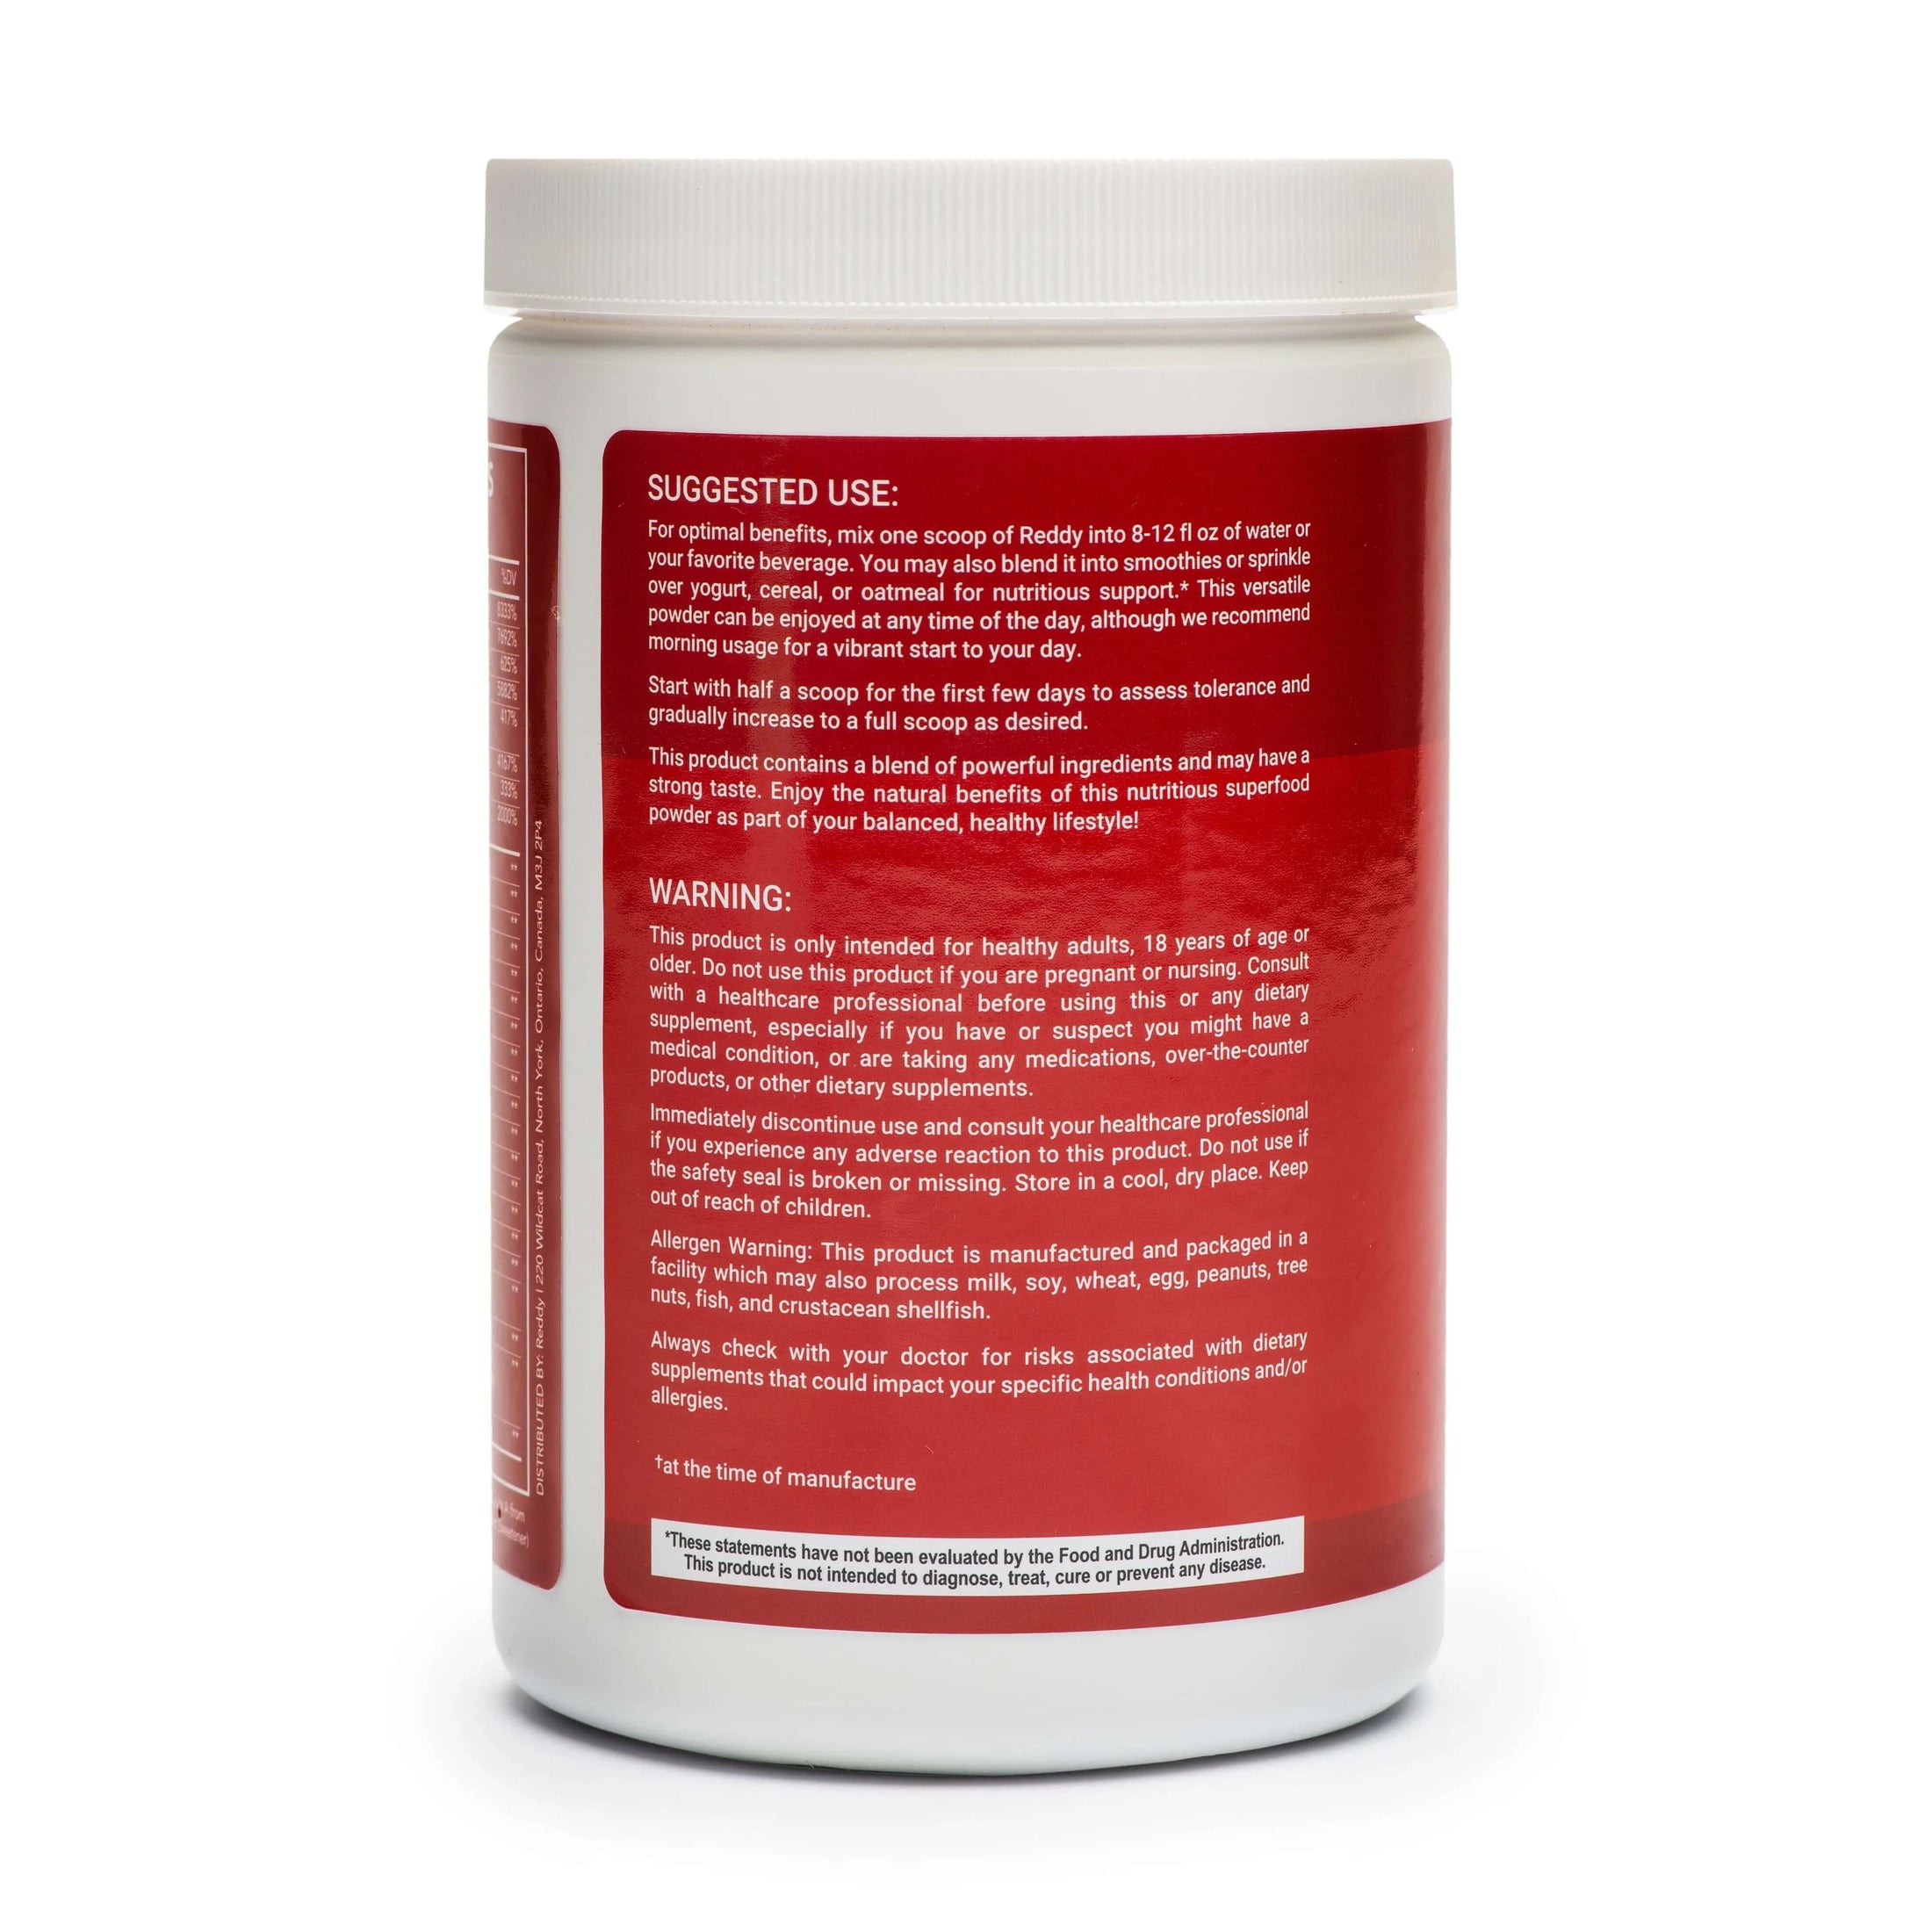 Directions of use for Reddy Red Superfood Powder